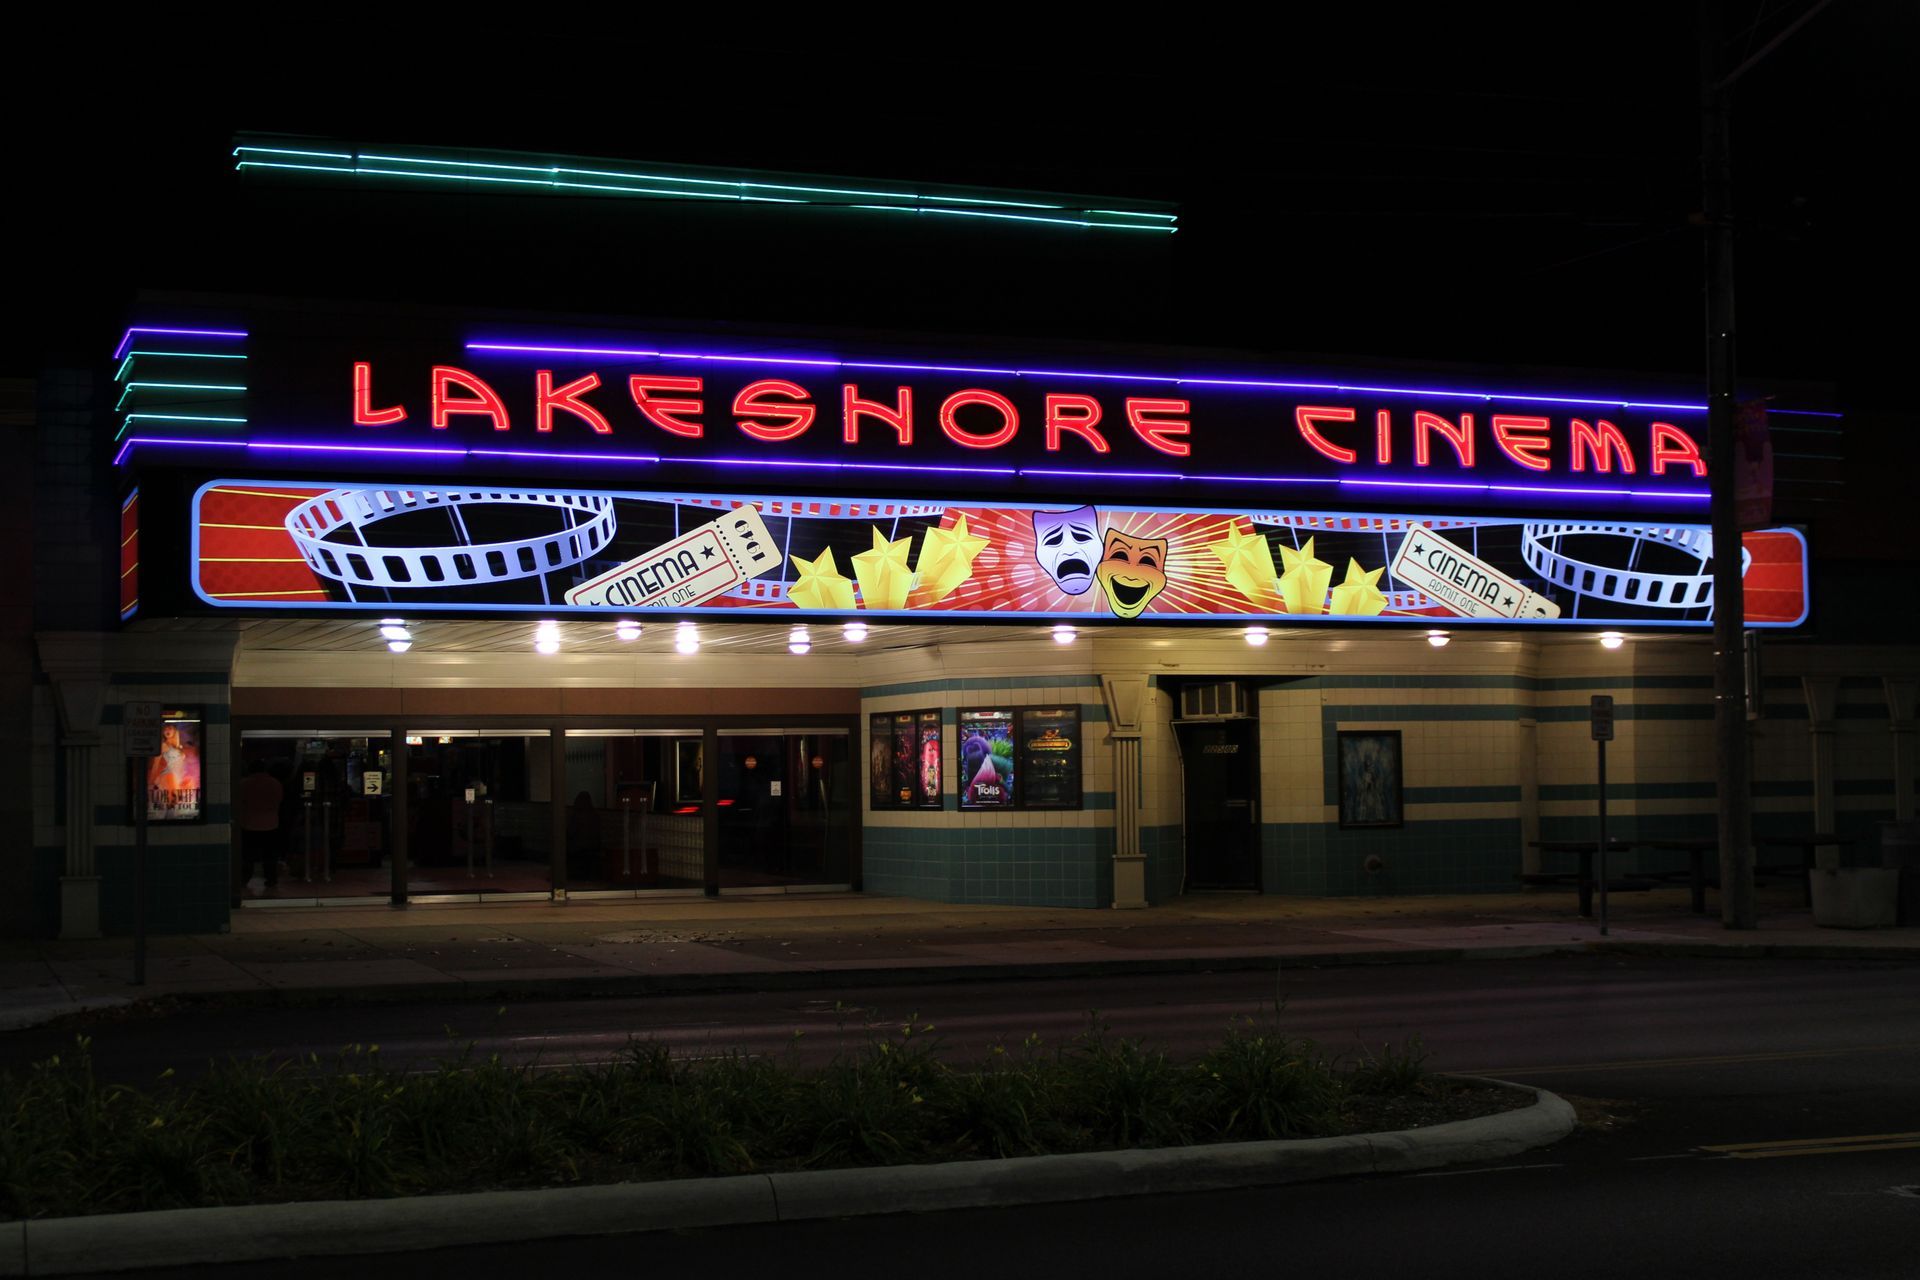 Atlas Lakeshore Cinema Gets a Facelift Thanks to Storefront Renovation